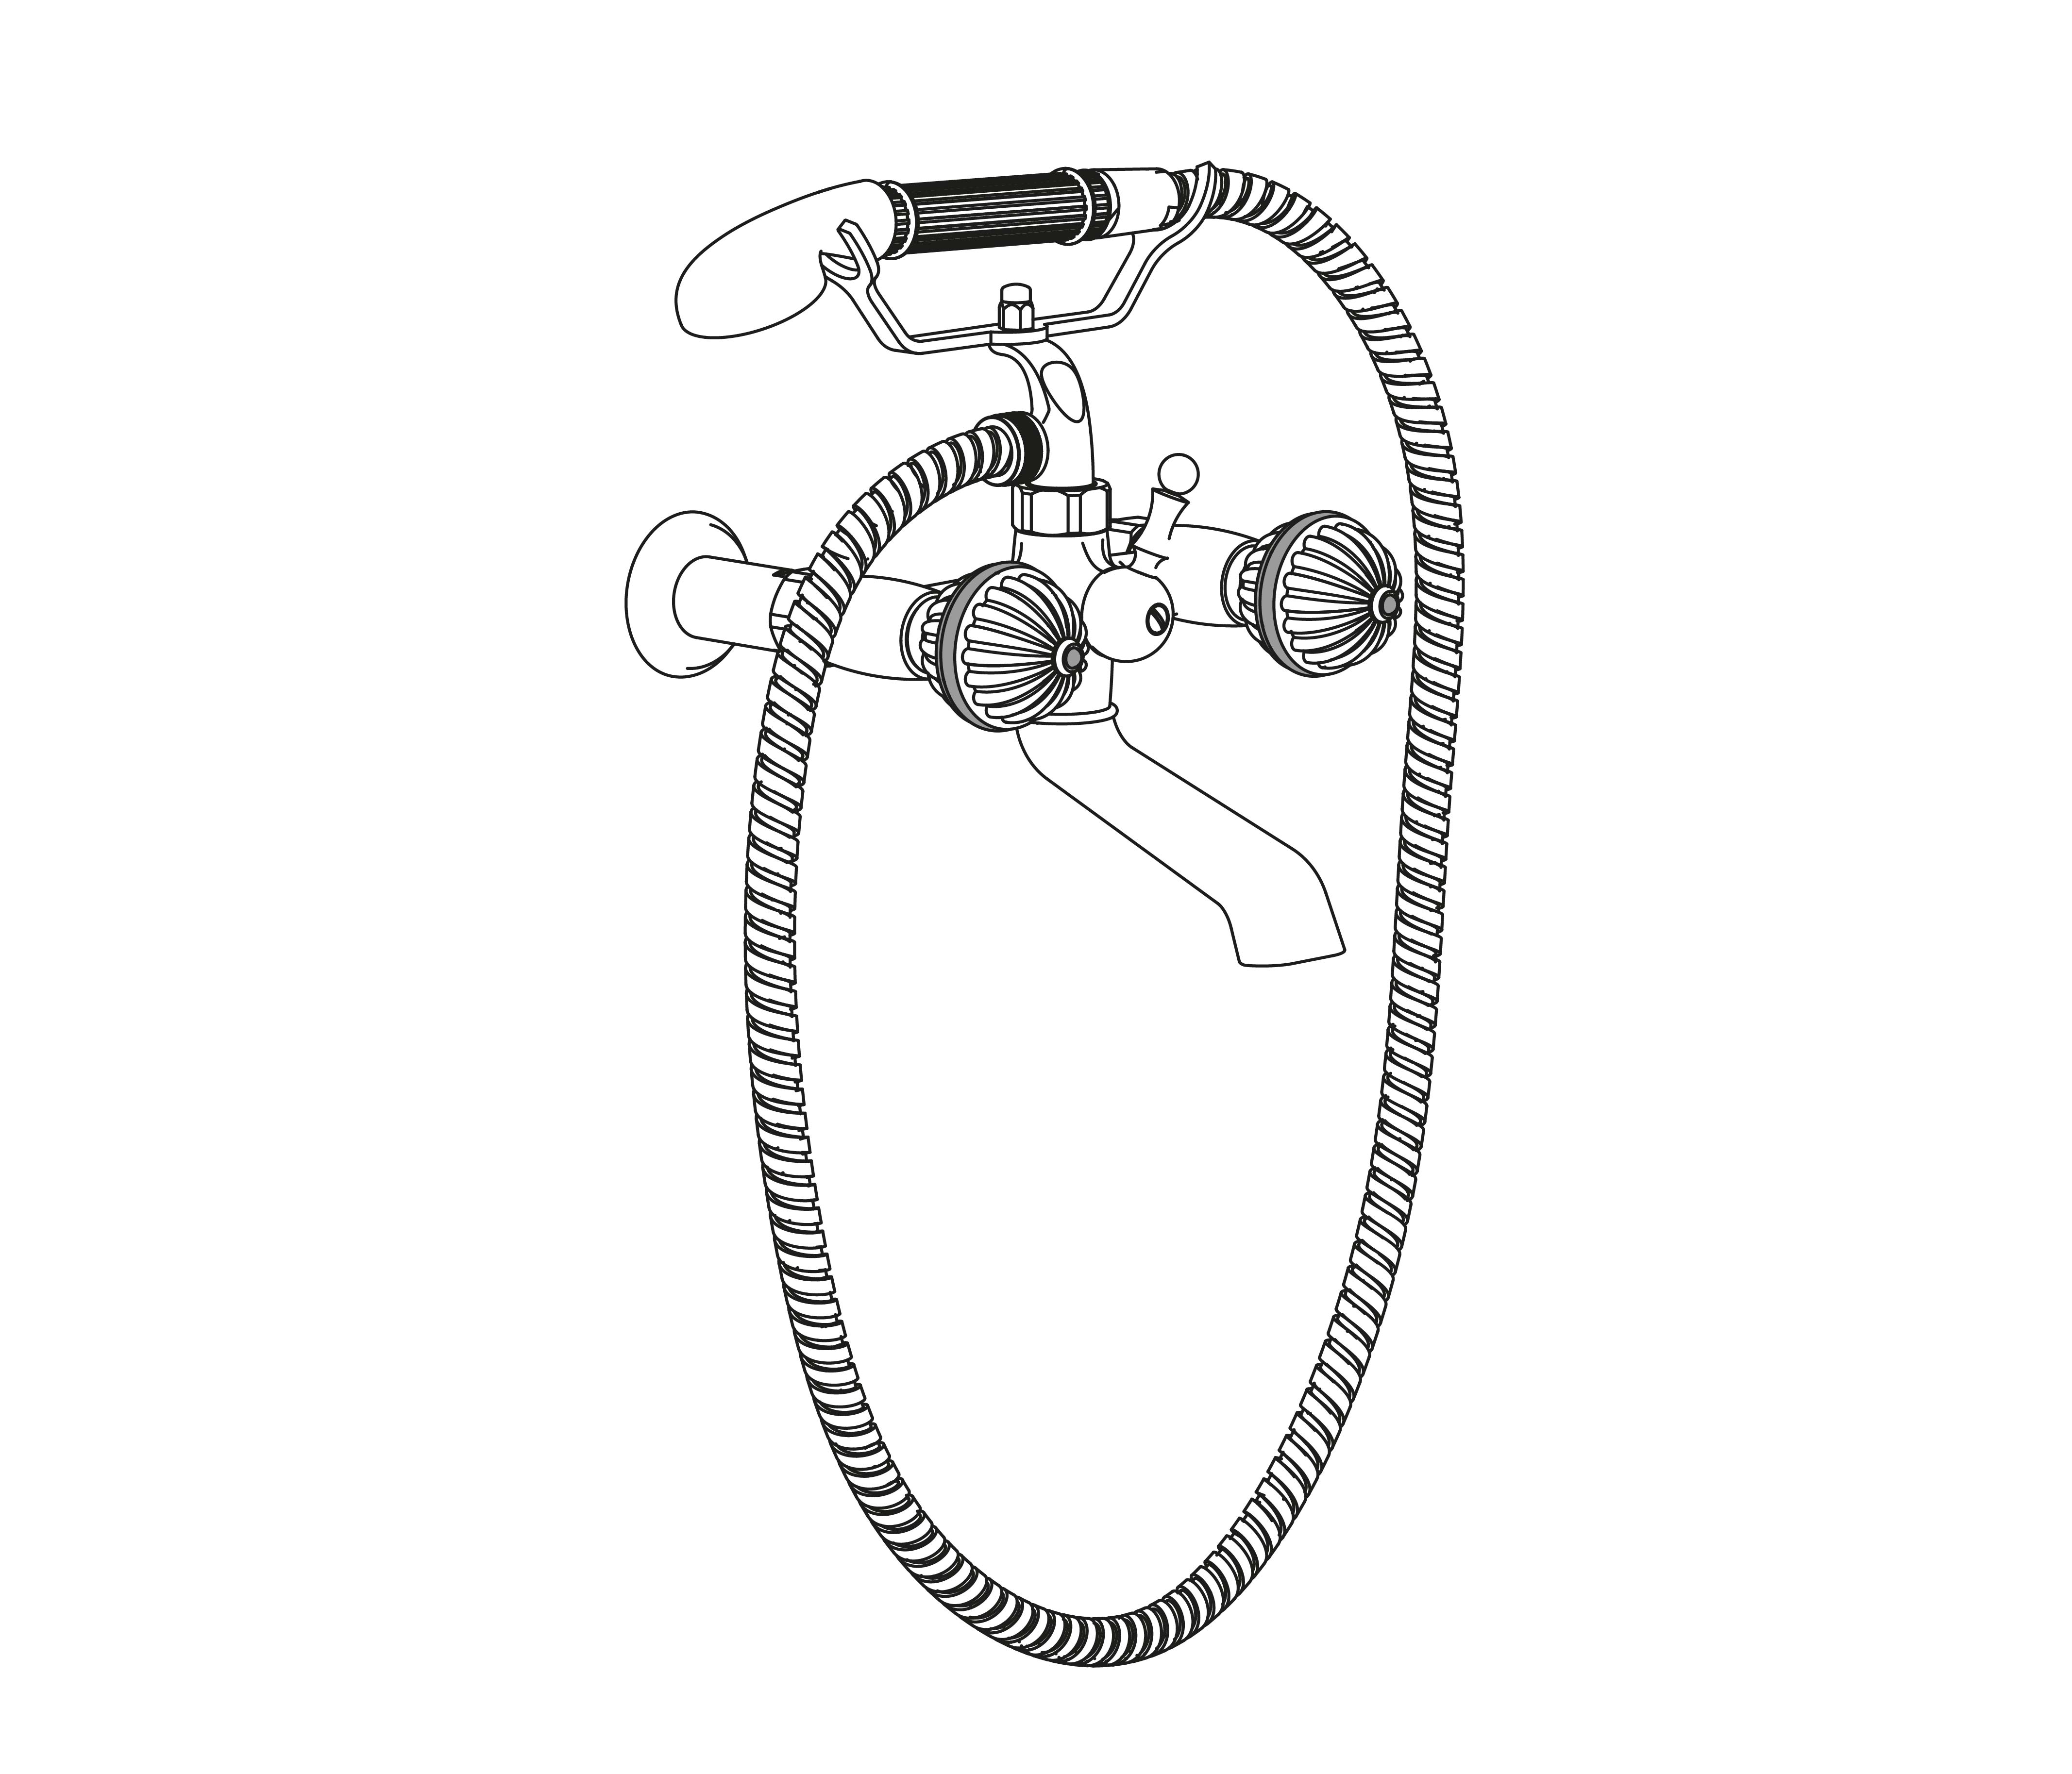 S134-3201 Wall mounted bath and shower mixer